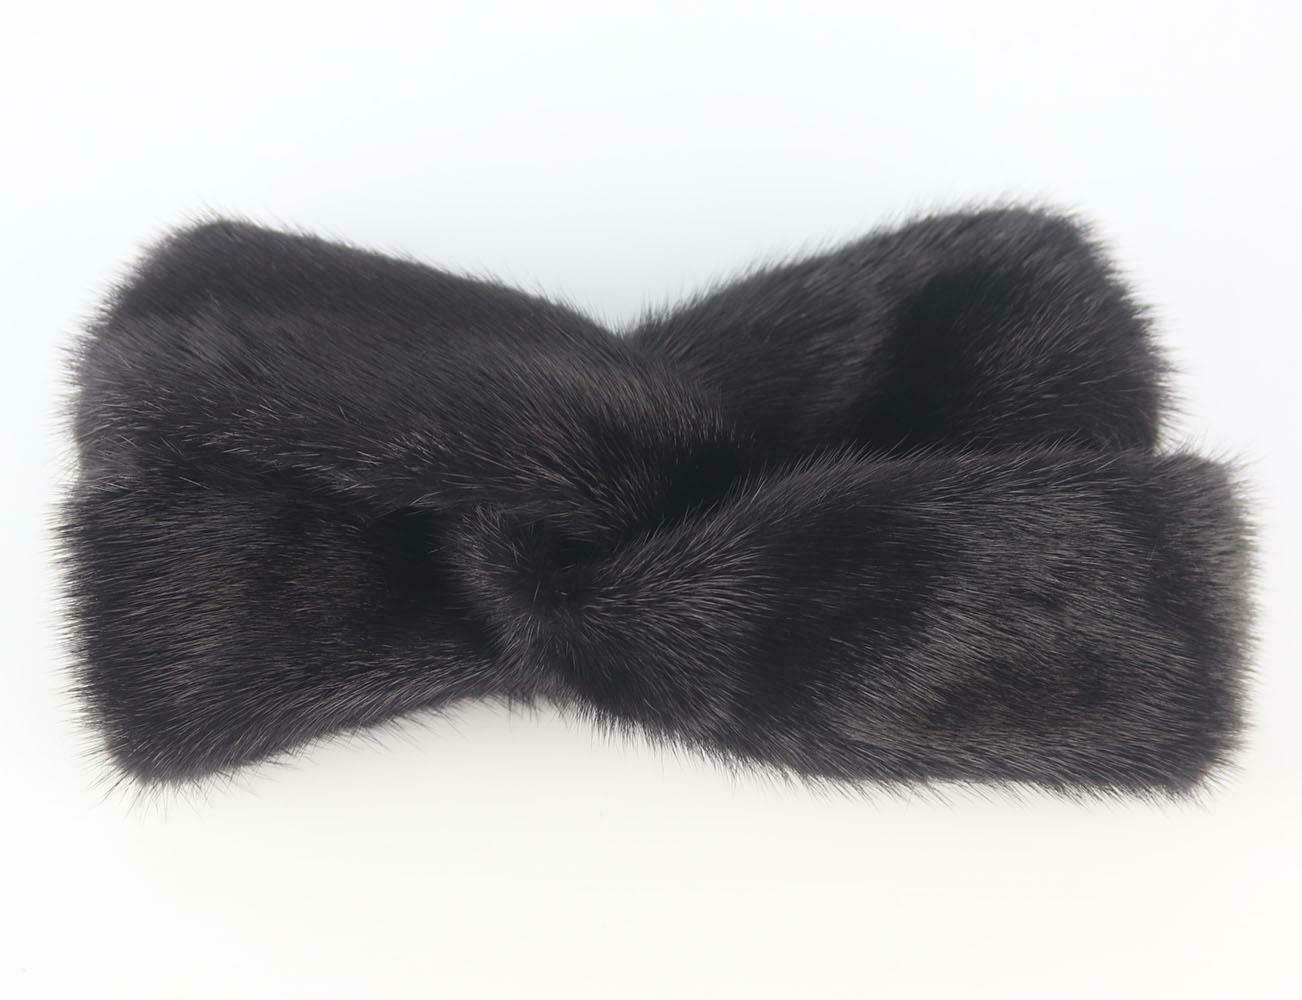 Gucci's black mink-fur headband, it has a twist-front and elasticated back which is wide enough to cover your ears, making it perfect for skiing or snowy city breaks.
Black mink-fur.
Slips on. 
100% Mink fur; lining: 100% silk. 

Dimensions: